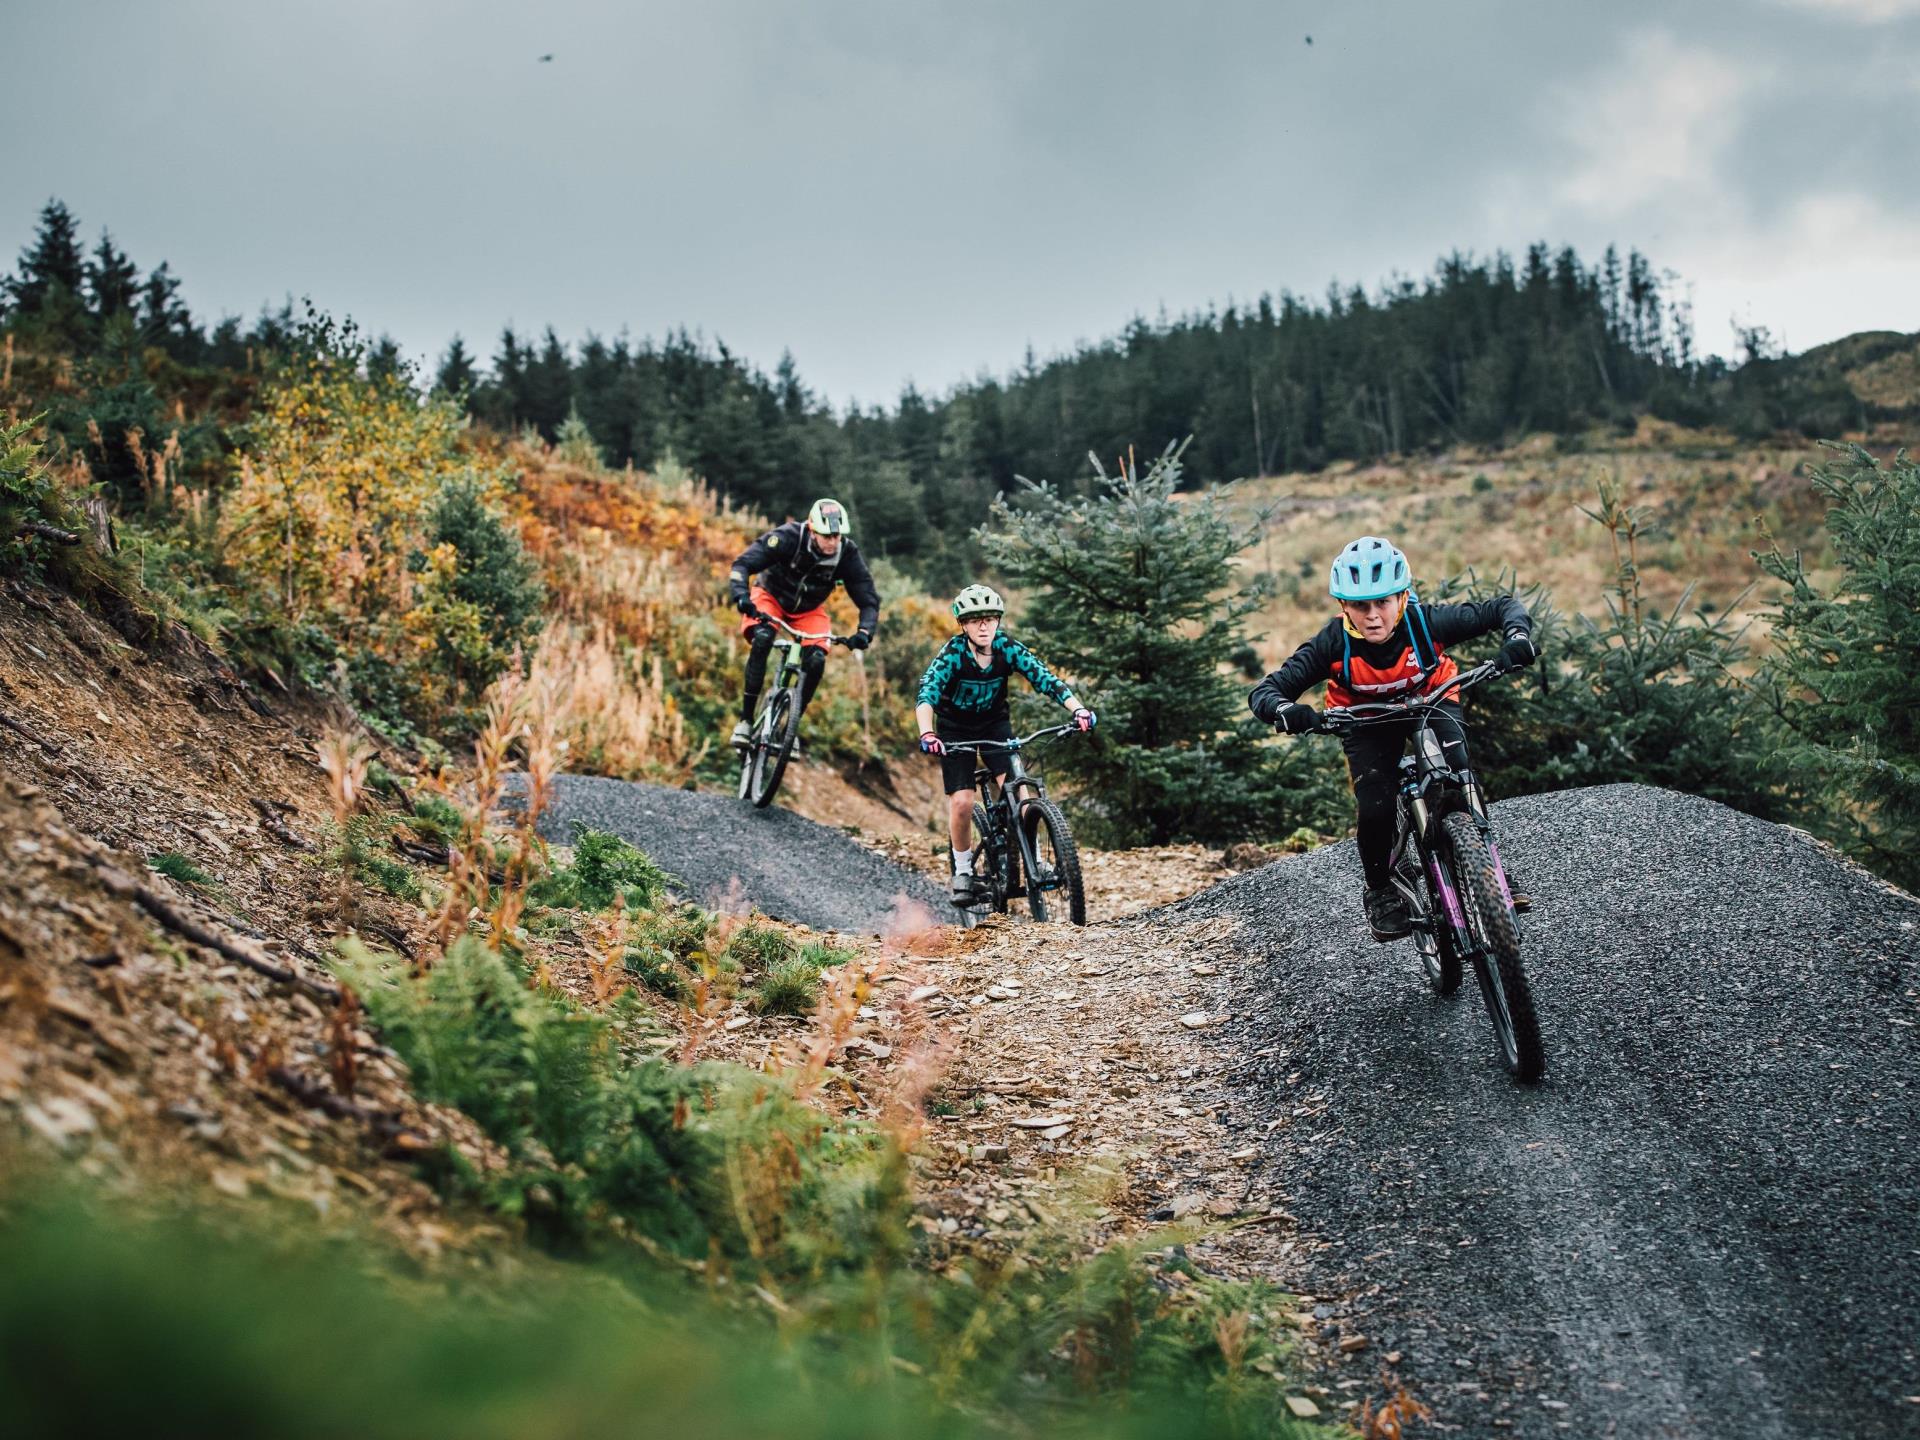 Mountain bike trails for all levels of rider